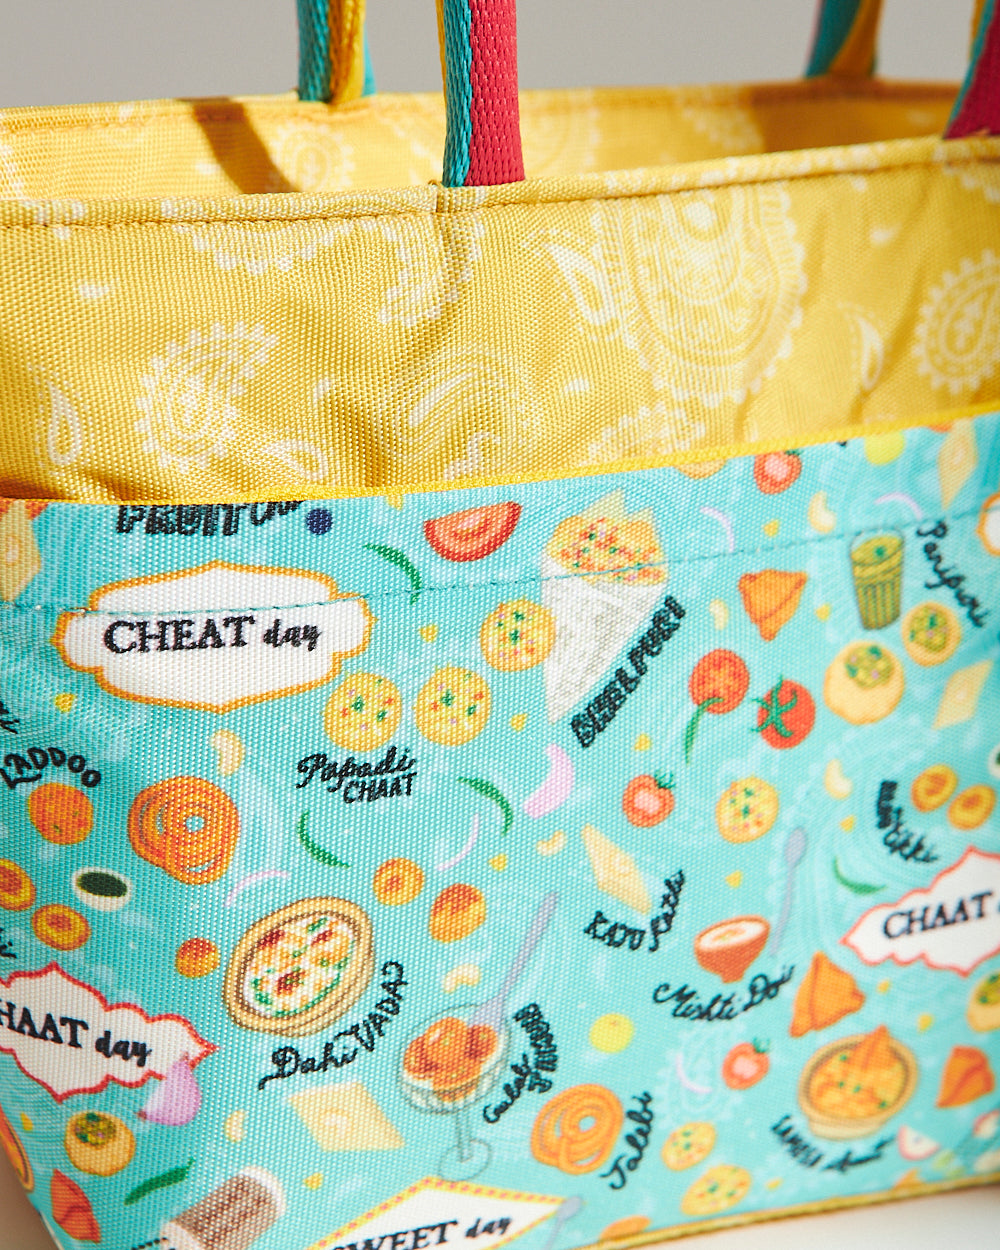 Cheat Day Sweet Day Lunch Bag